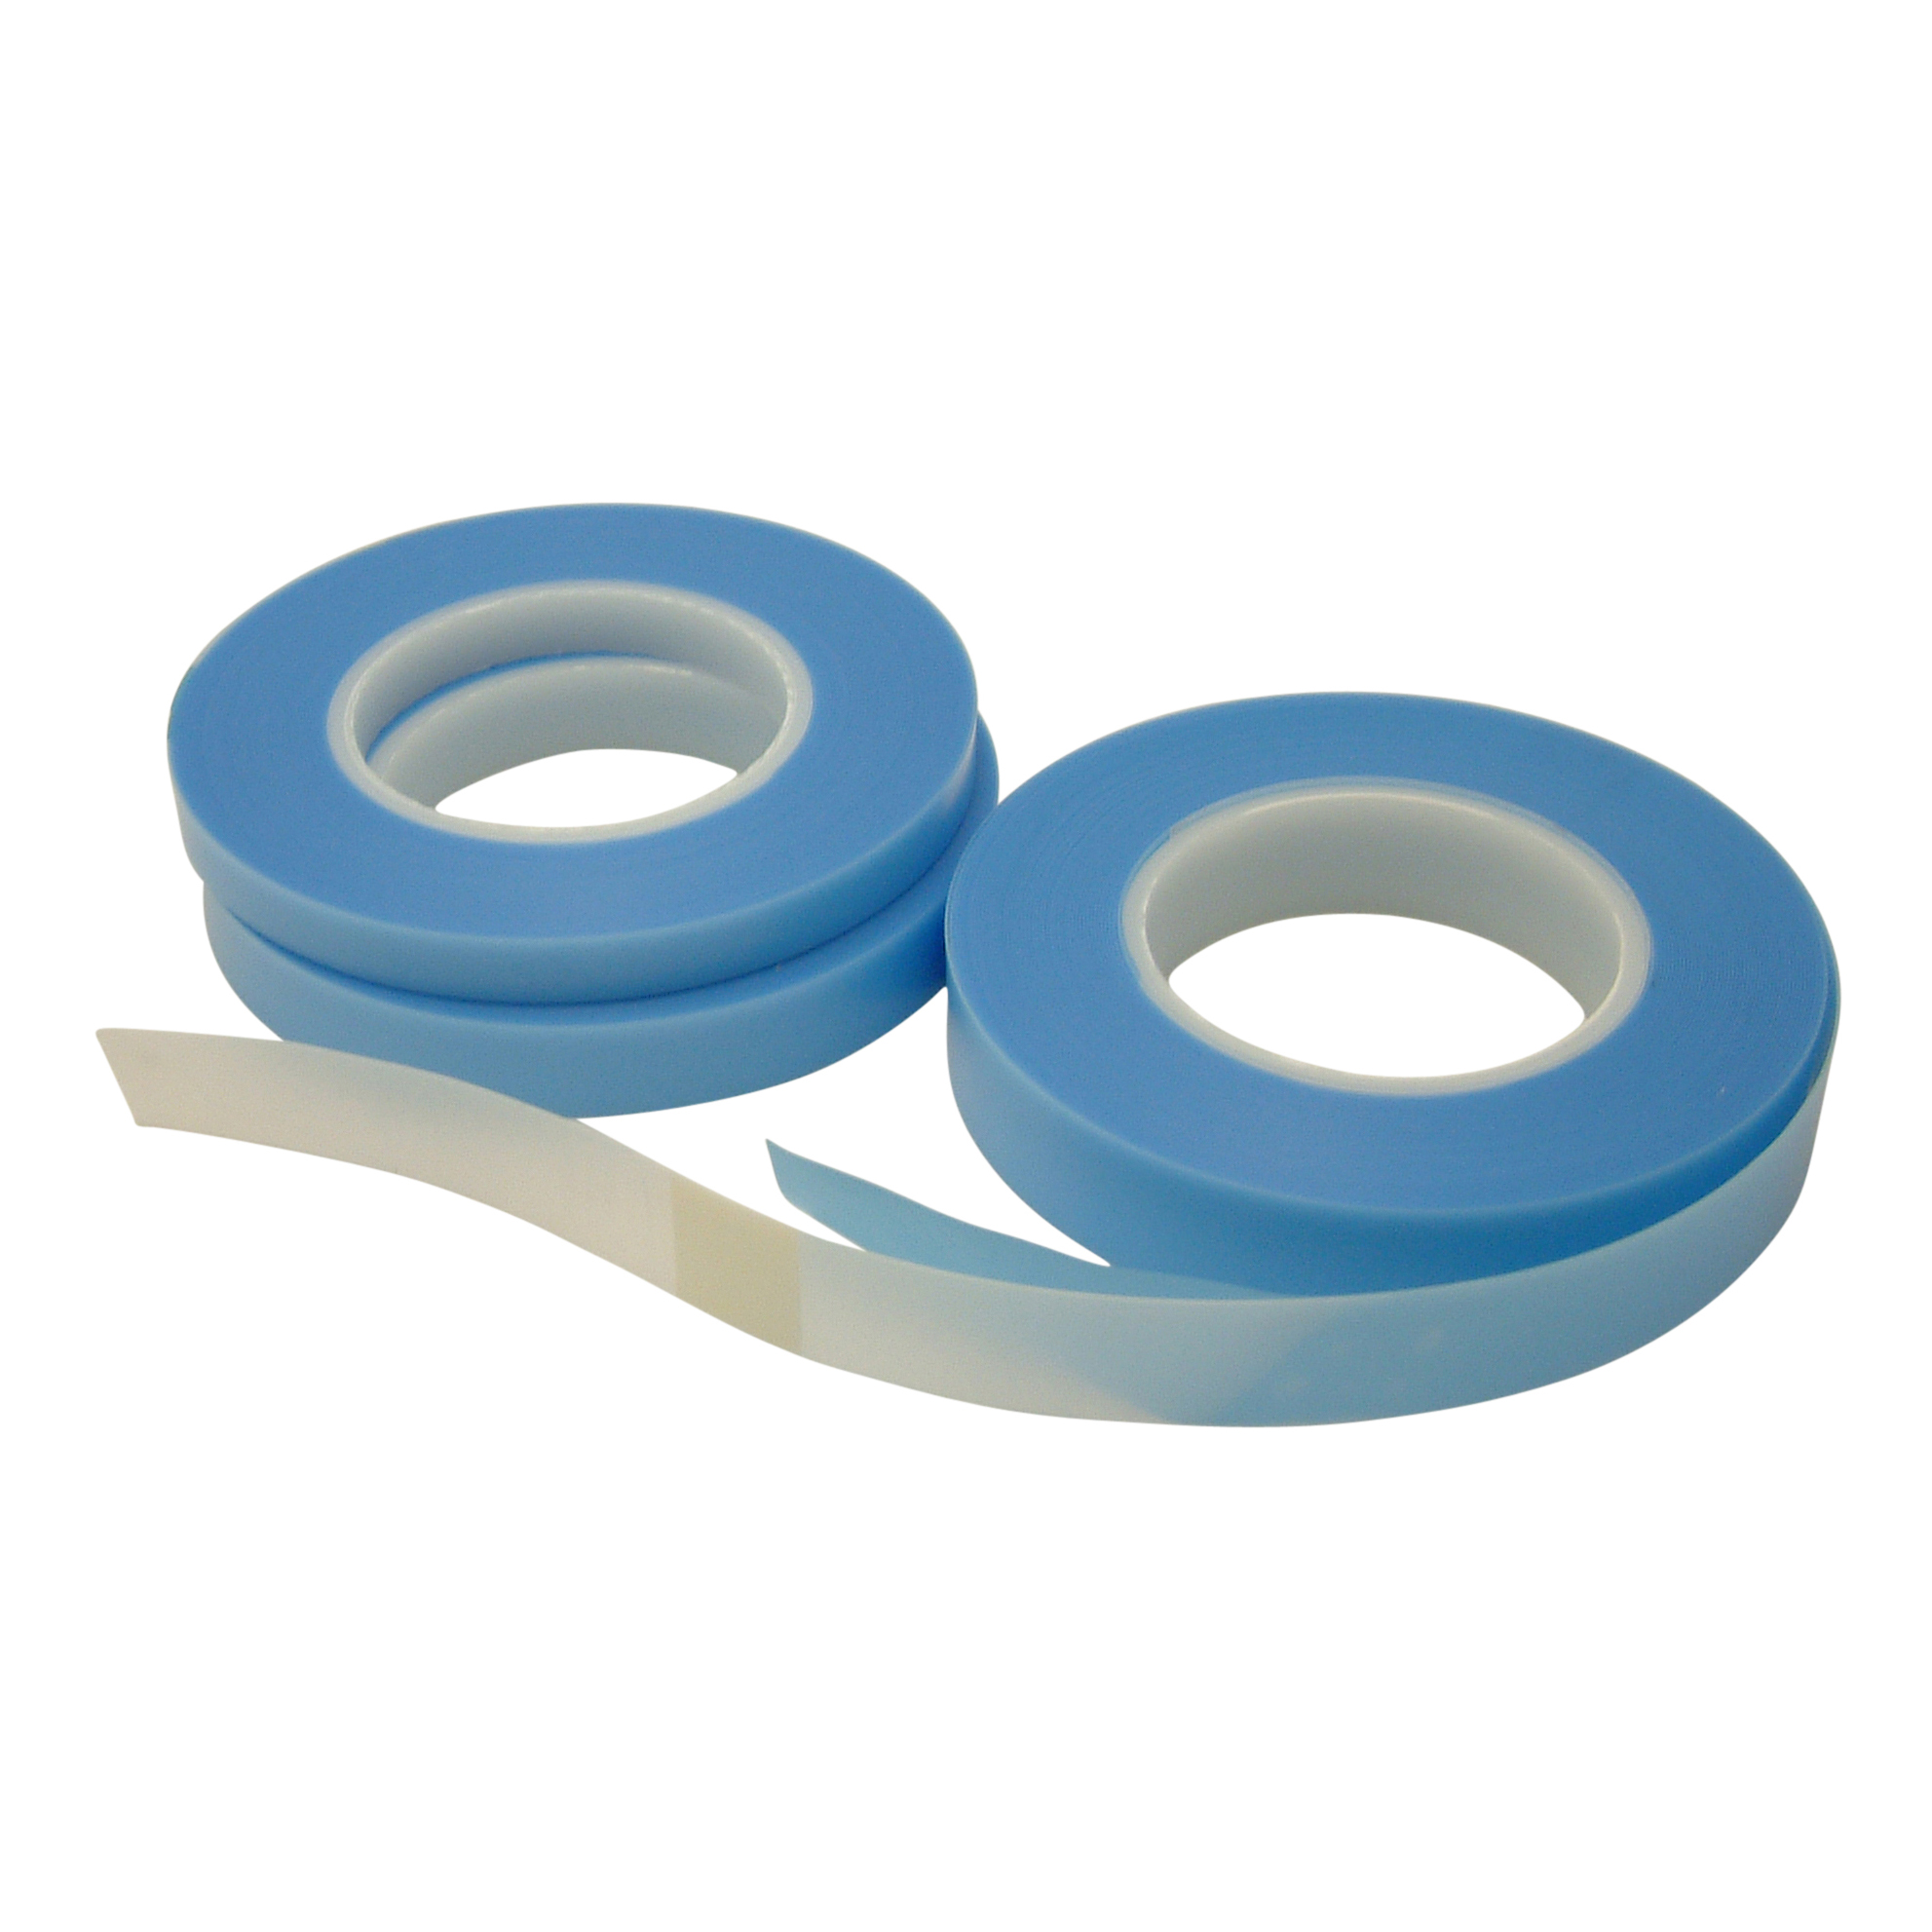 UHMW-20A Polyethylene Transparent Film Slick Tape : 2 X 36 yds Pack of 1 ROLL Clear Available in Multiple Sizes Drawers Ideal for Squeak Reduction and Bearings Aggressive Adhesive